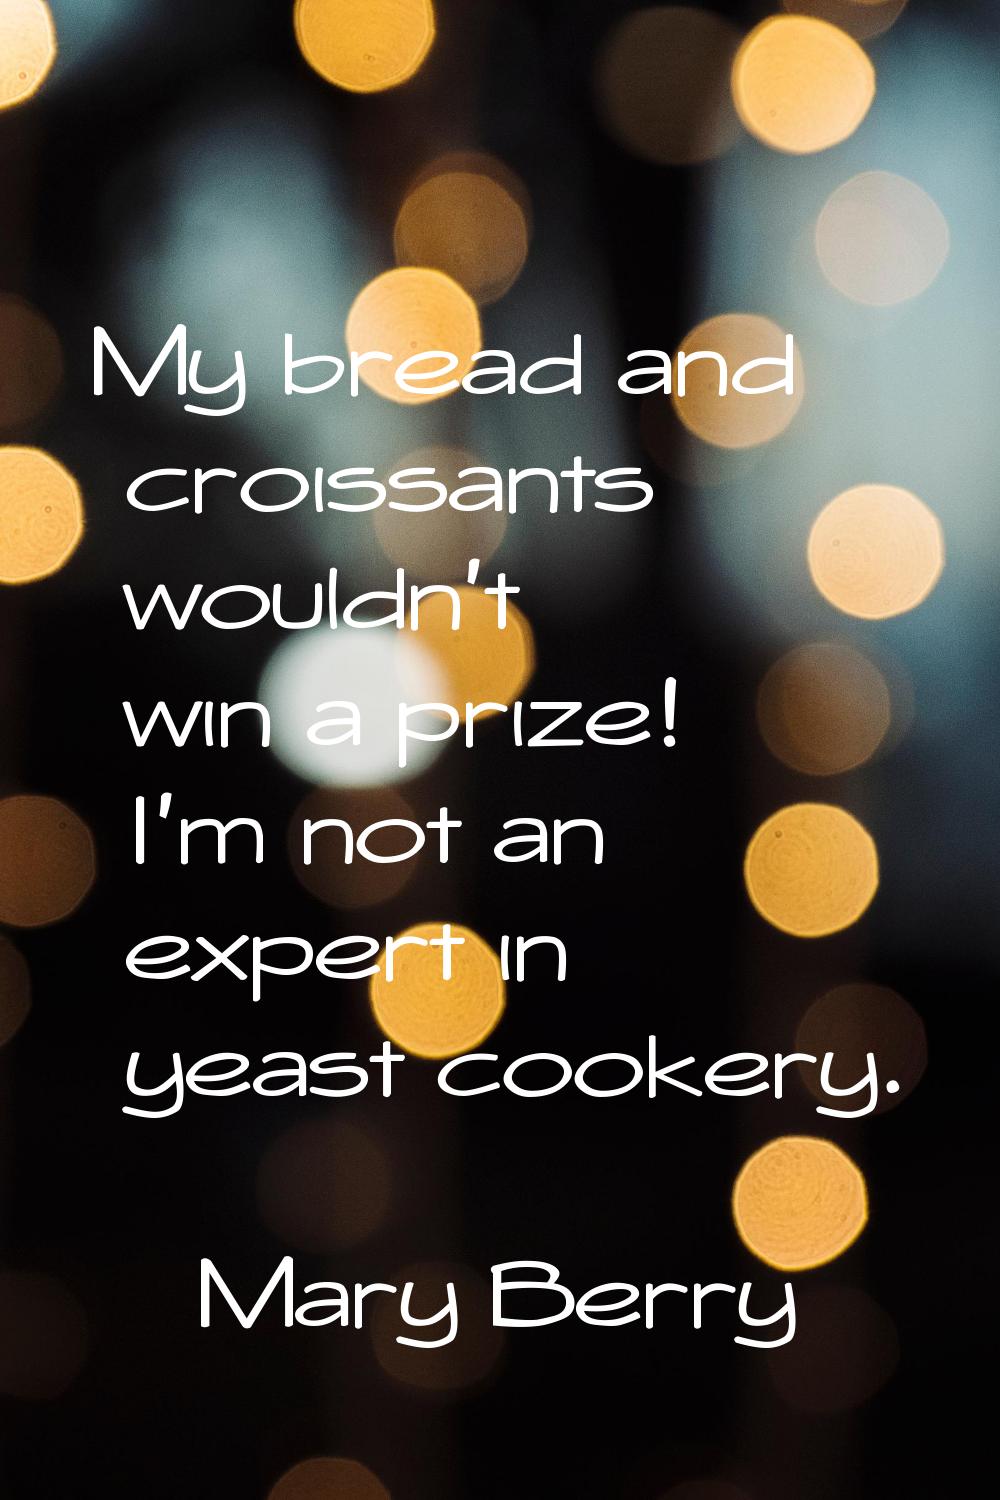 My bread and croissants wouldn't win a prize! I'm not an expert in yeast cookery.